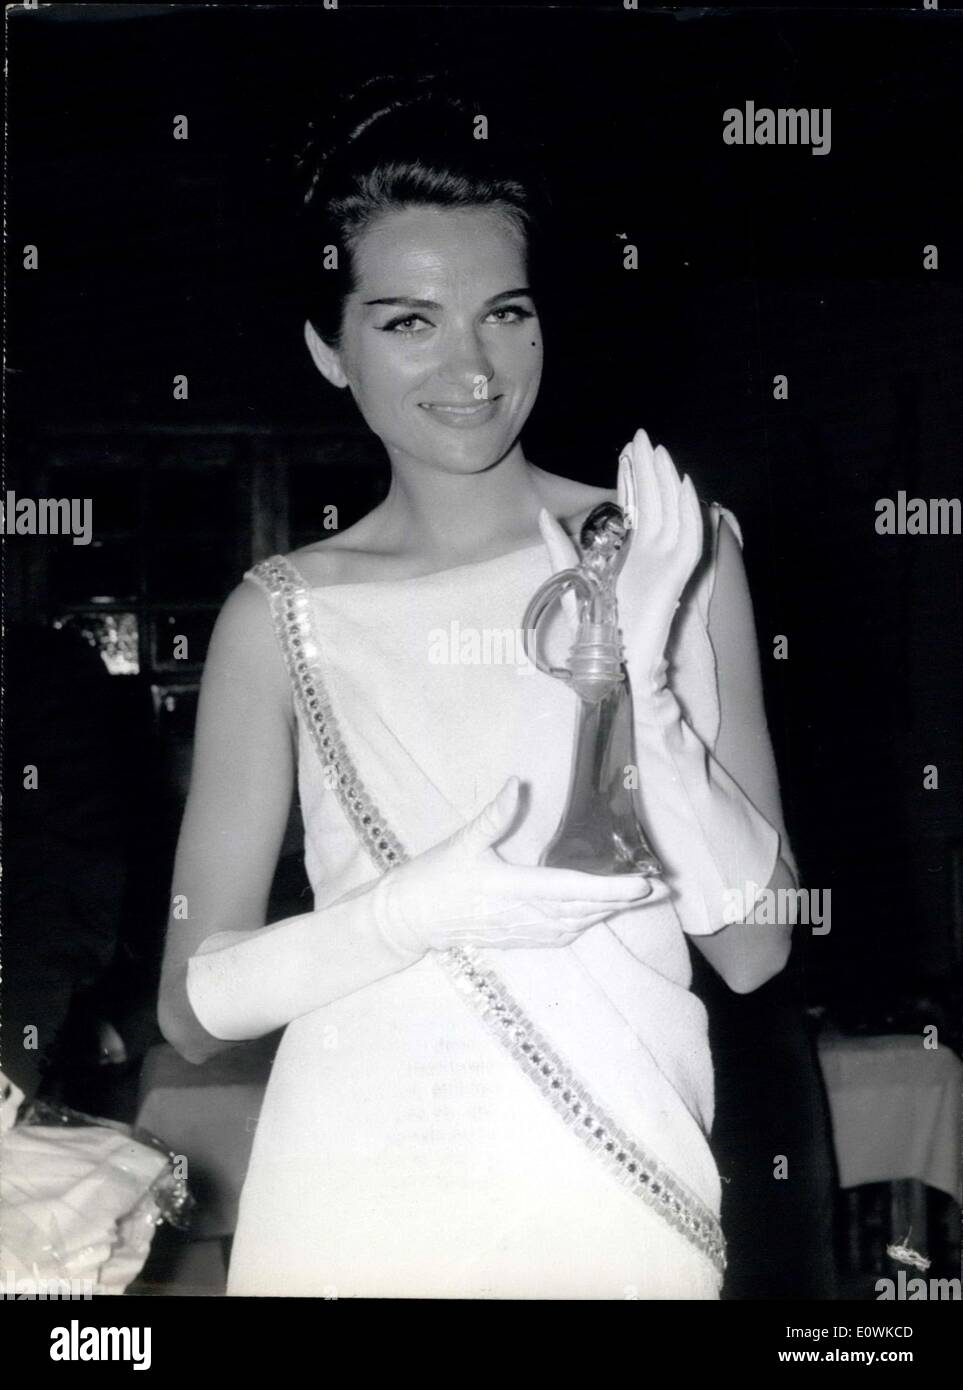 Jun. 28, 1963 - She recieved the ''Oscar'' of models: A jury composed of Press and High Fashion personalities awarded Miss Andree Alteirac (Alta), 25 French but born in Indochina, with the Oscap of Models. Photo shows Alta, Oscar 1963 of models with her prize. Stock Photo